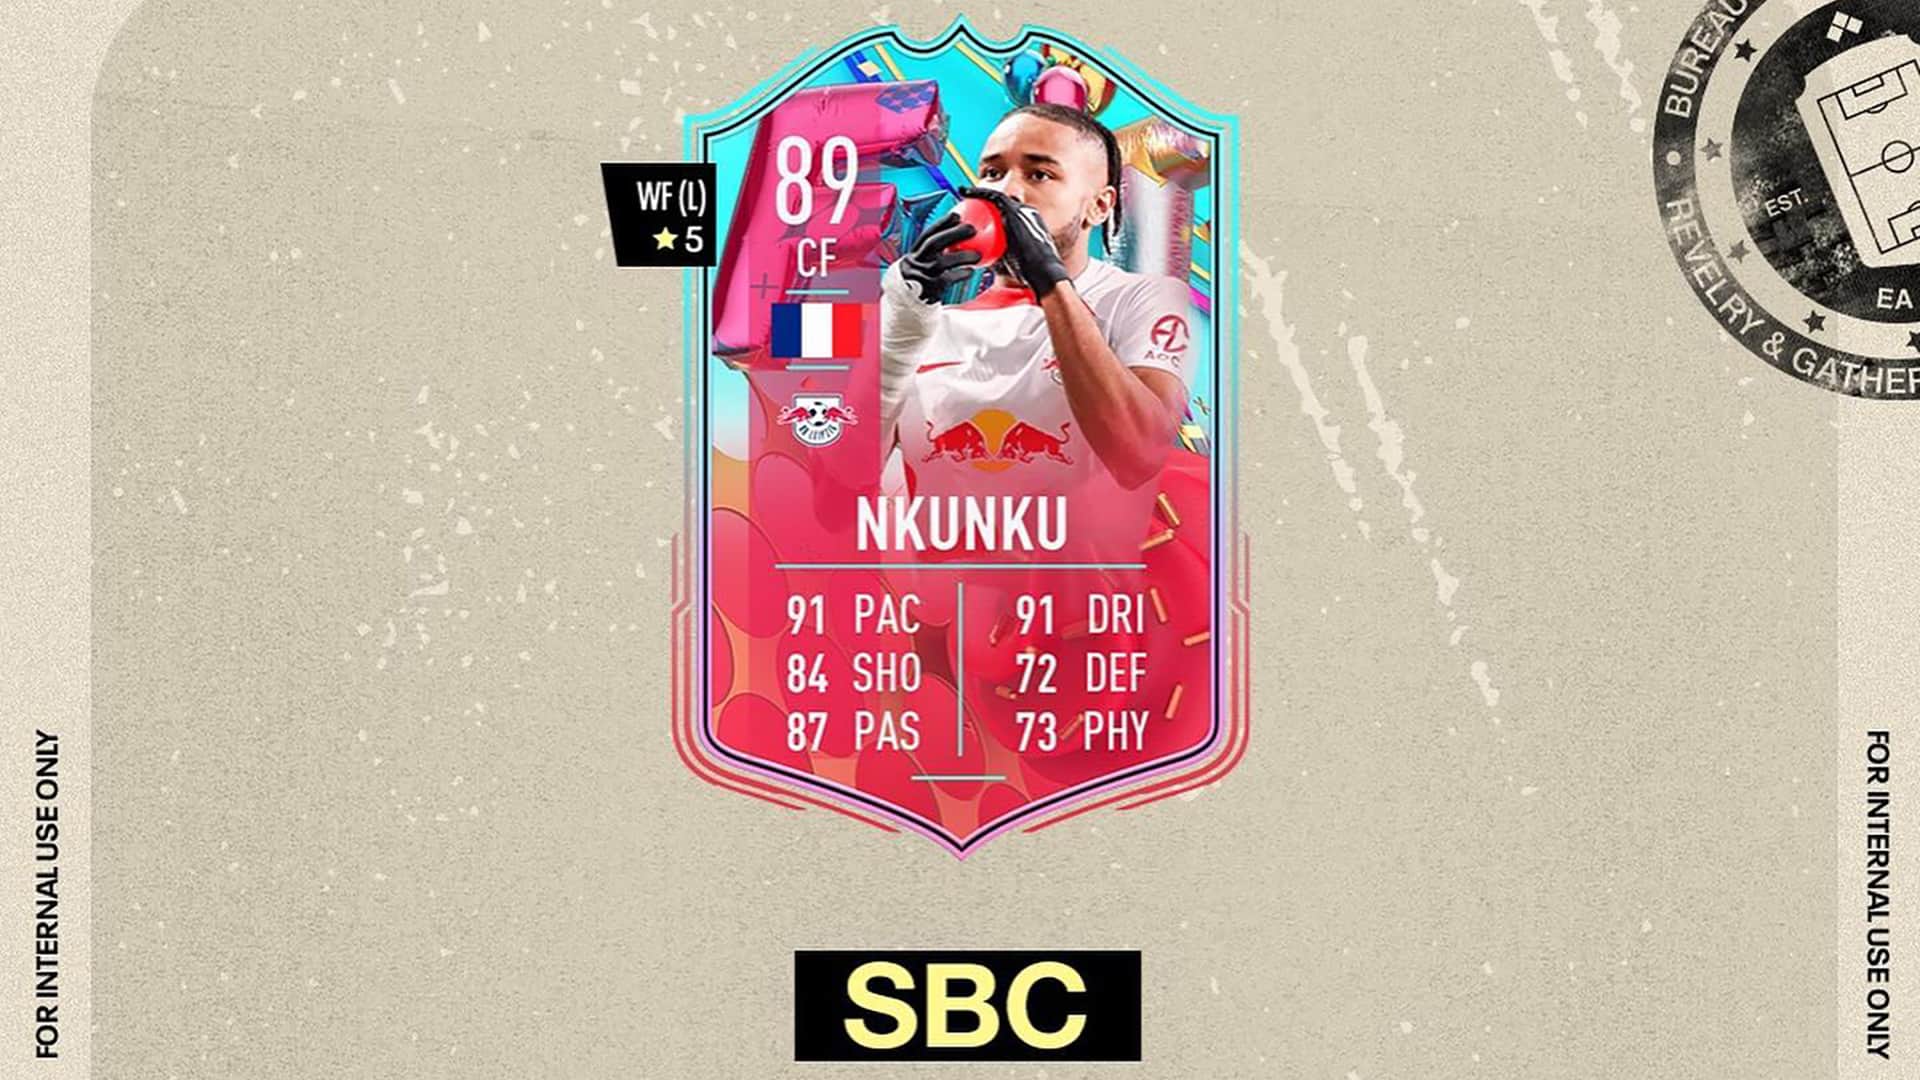 ANOTHER NKUNKU SBC FOR TOTS😳⁉️ credit to: fut sheriff, donk